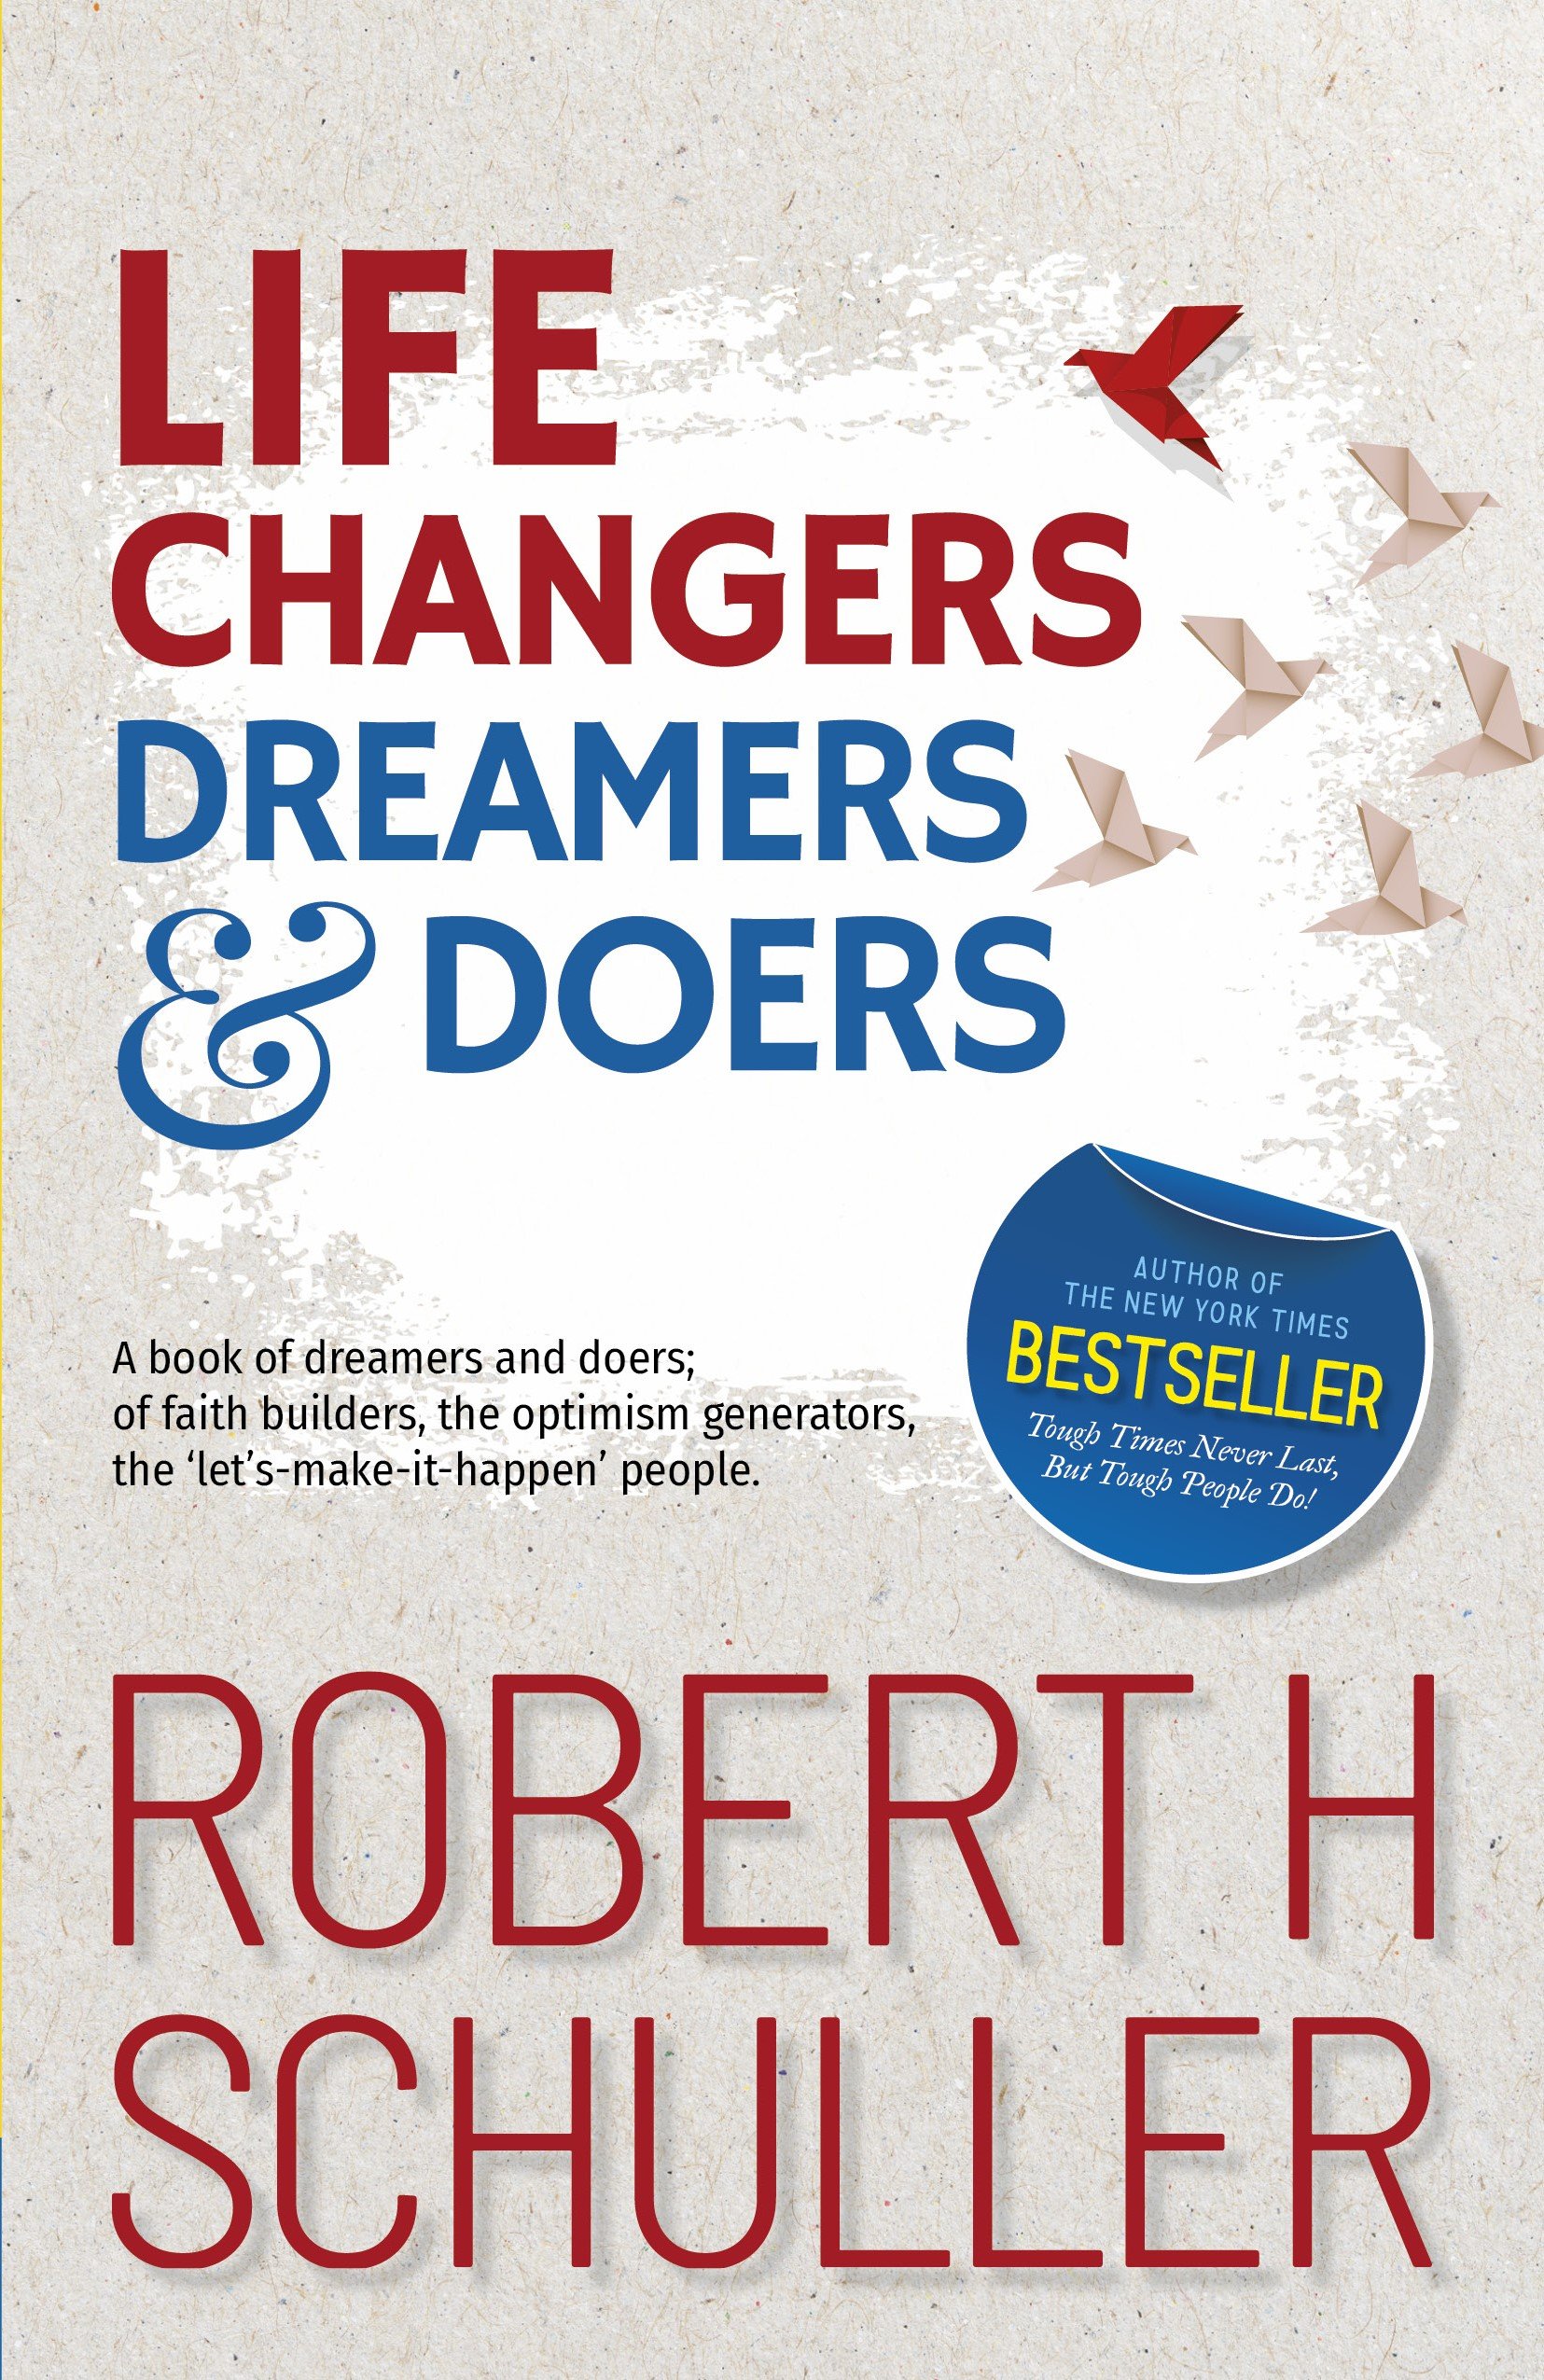 Life Changers: Dreamers and Doers